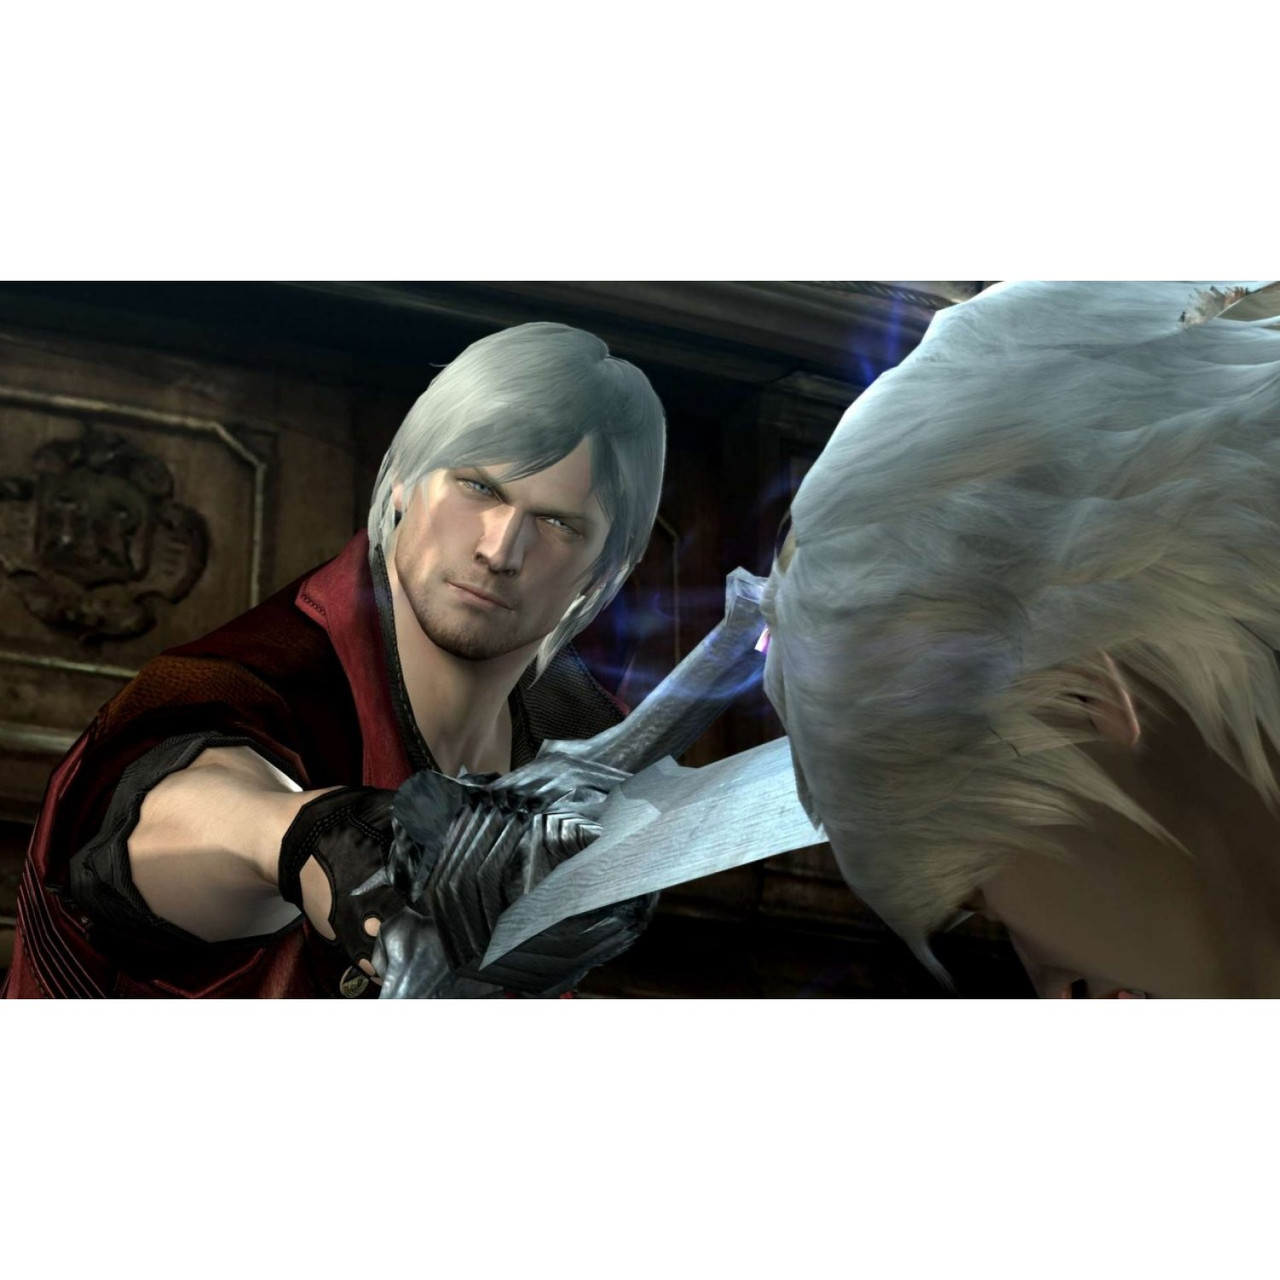 Devil May Cry 4: Special Edition lets you play as Vergil - new